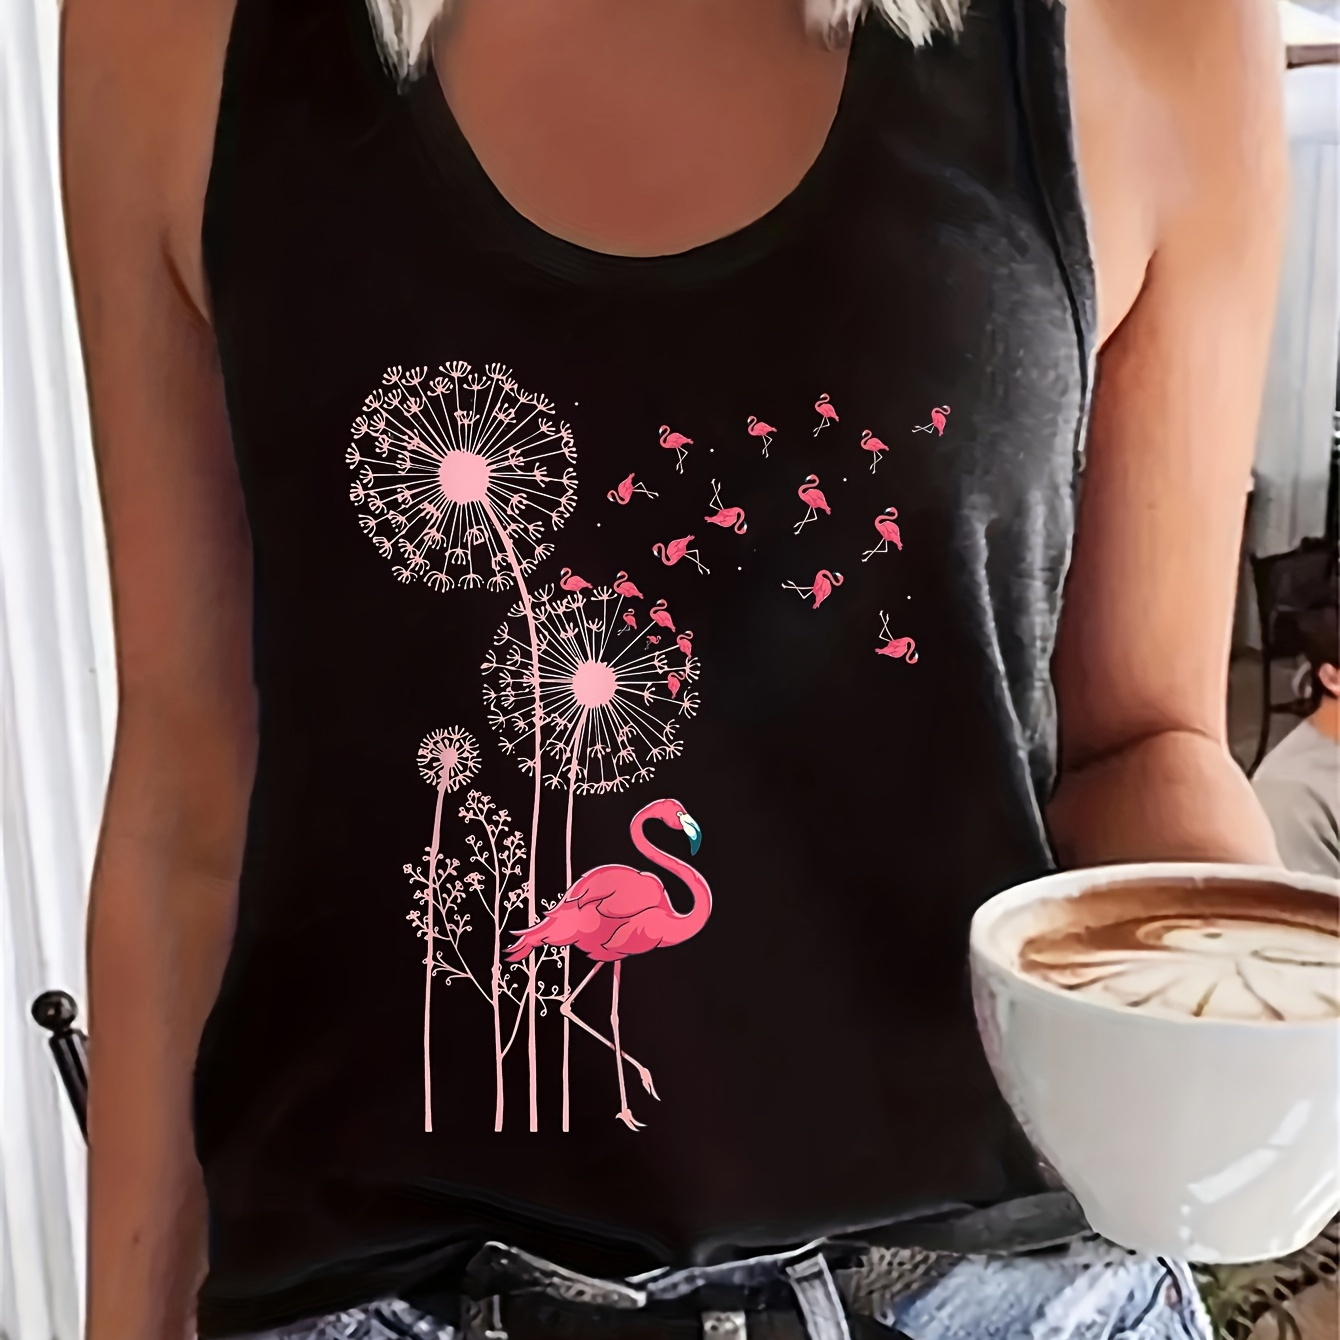 

Flamingo & Floral Print Tank Top, Sleeveless Casual Top For Summer & Spring, Women's Clothing